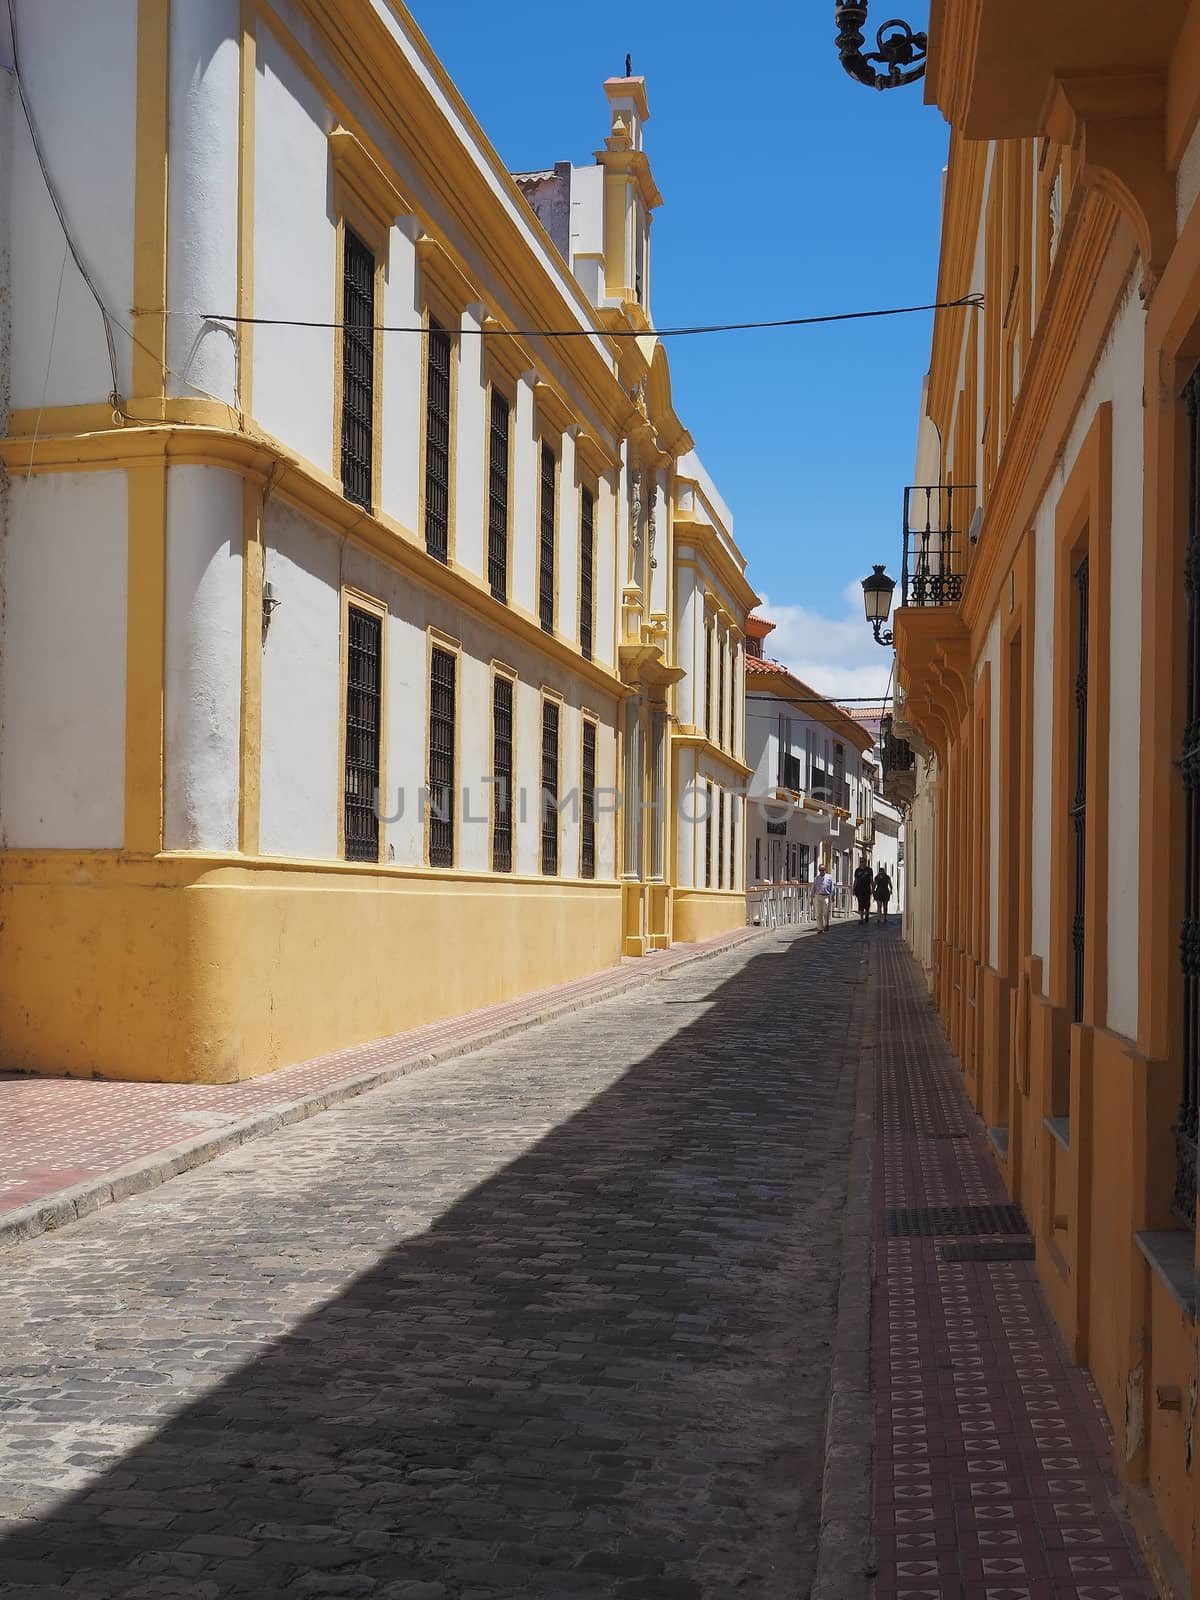 Typical Spanish street of buildings by PhilHarland